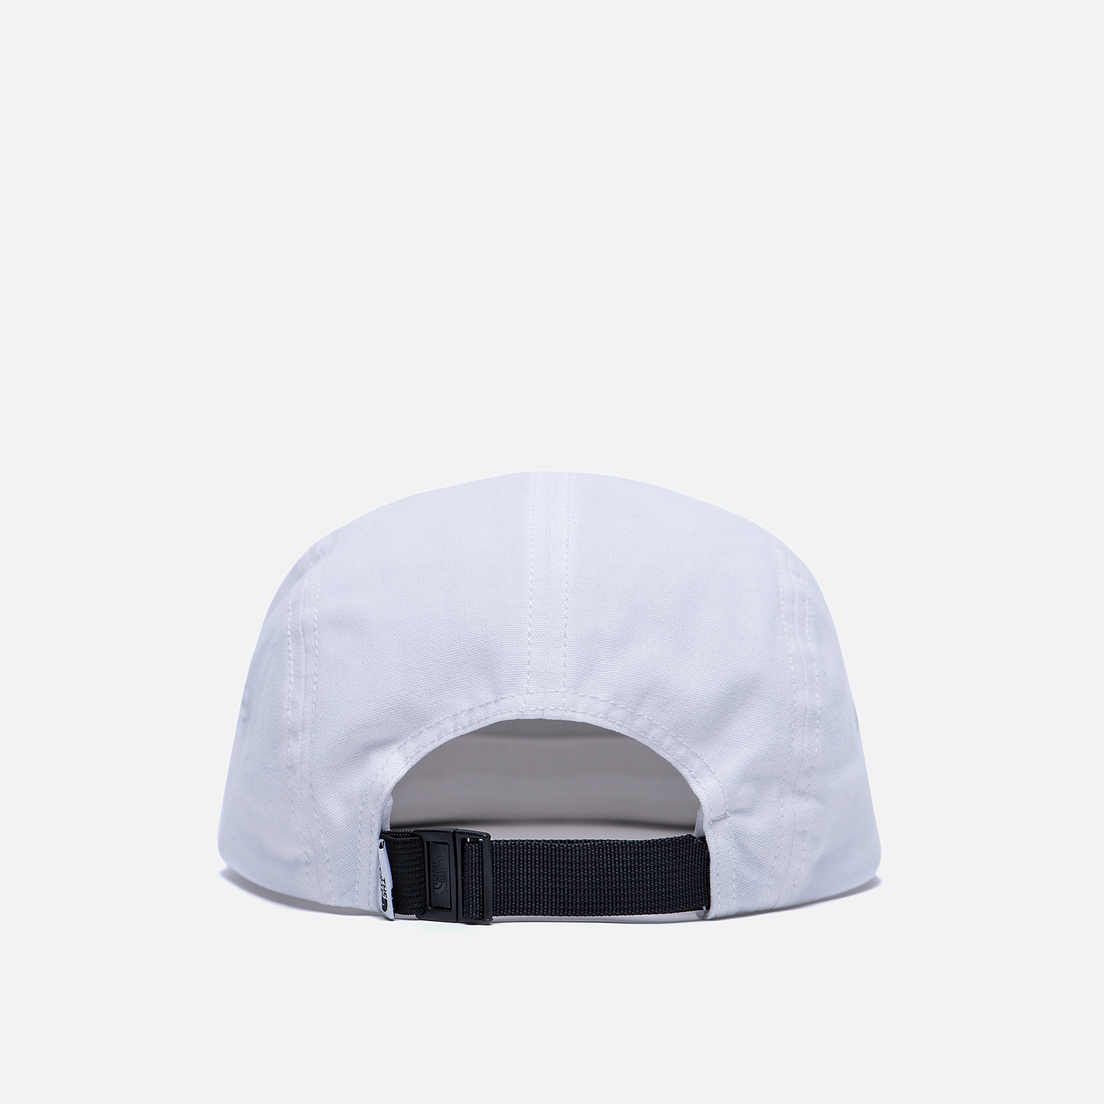 The North Face Кепка Five Panel